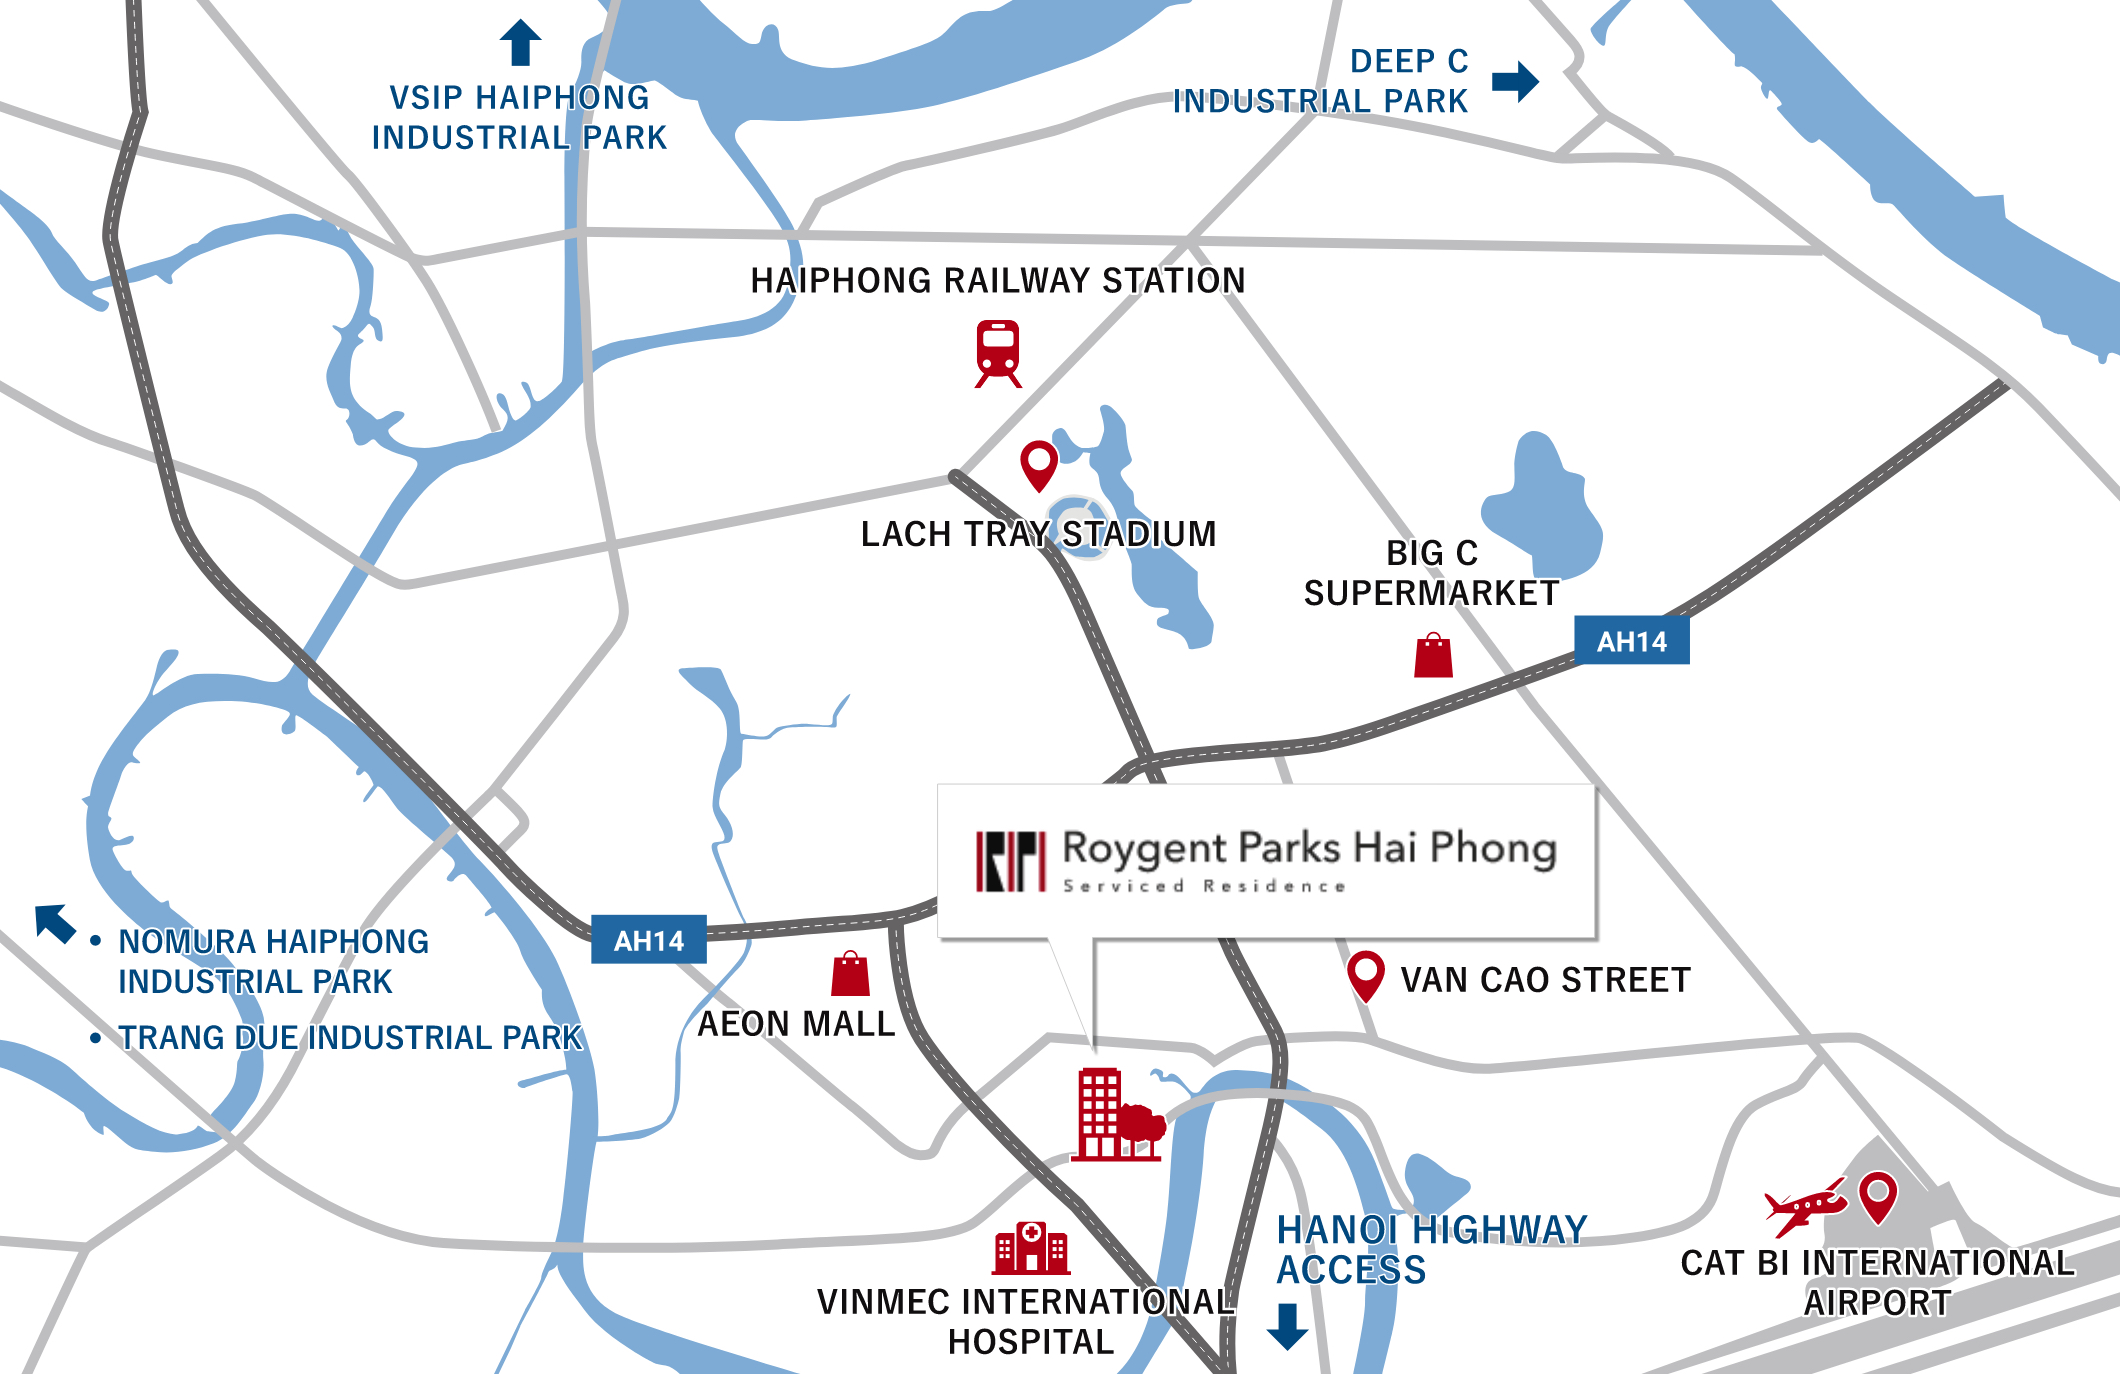 LOCATION-Nearby Cat Bi International Airport and highway entrance. <br>This is a good area, convenient commute to Industrial Parks and easy access to Van Cao Street with a diversity of Japanese restaurants and shops. <br>There are international hospitals and international schools nearby. <br>This location is expected to be a new strategy center of the city. -Roygent Parks Hai Phong